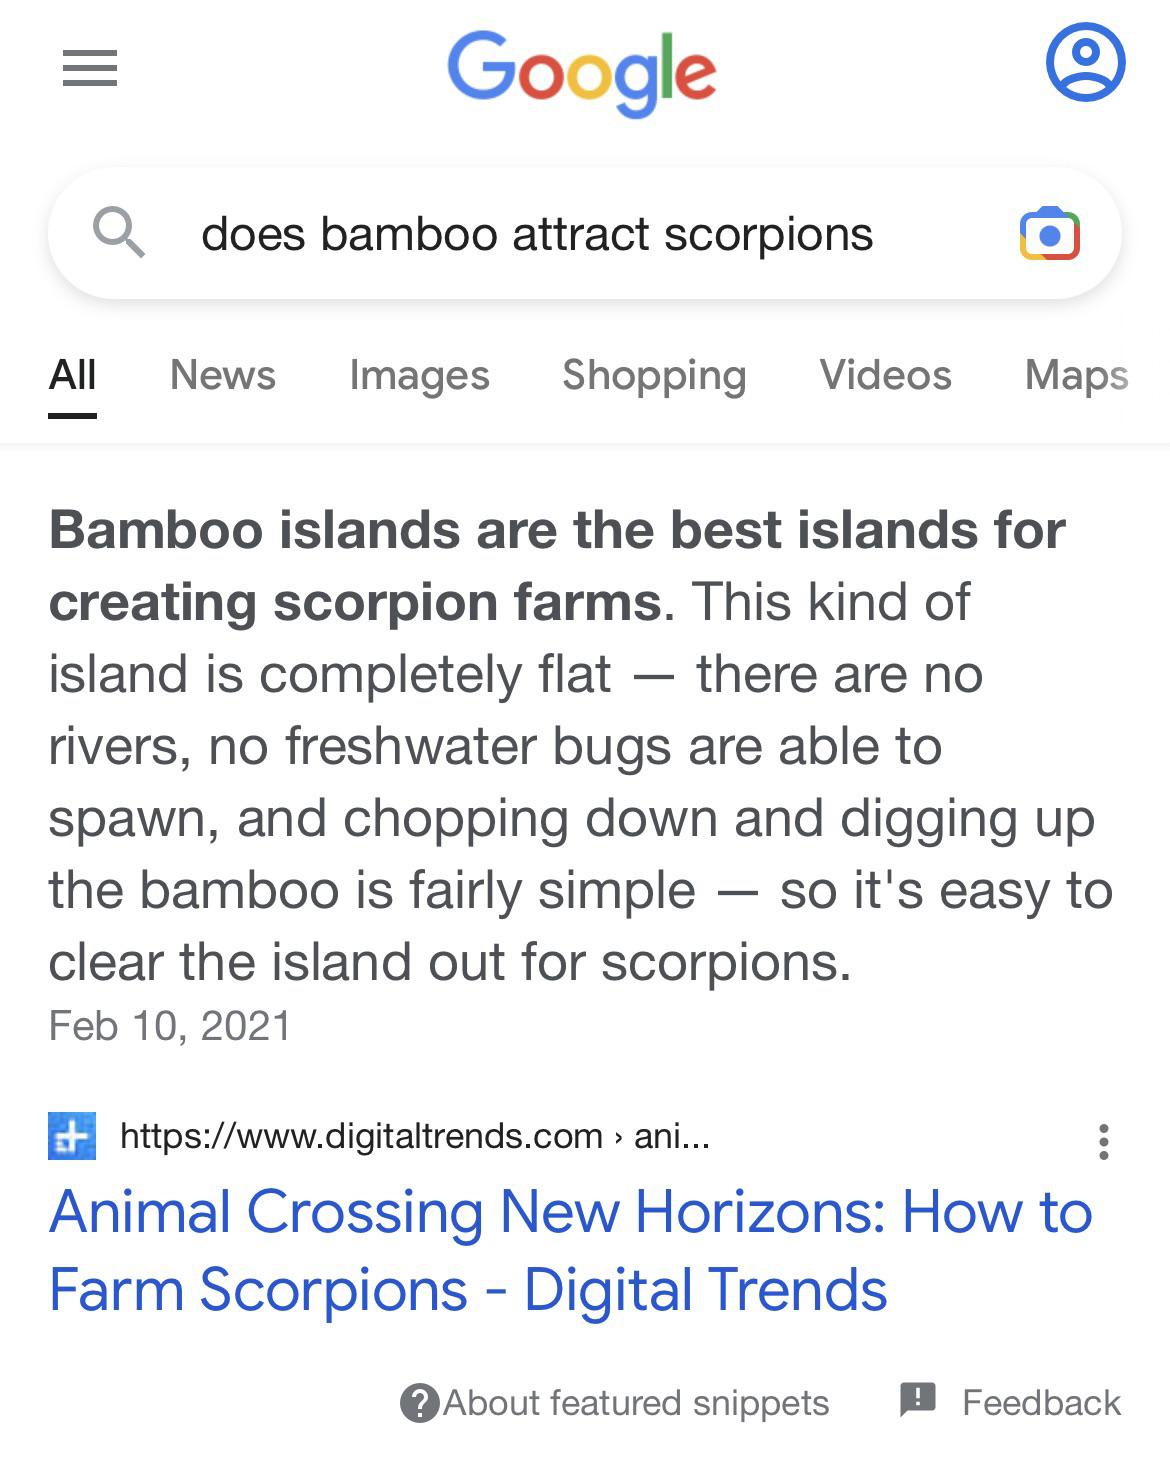 I meant to research bamboo for my real life garden, but it’s nice to know Animal Crossing information was the leading search result lol.